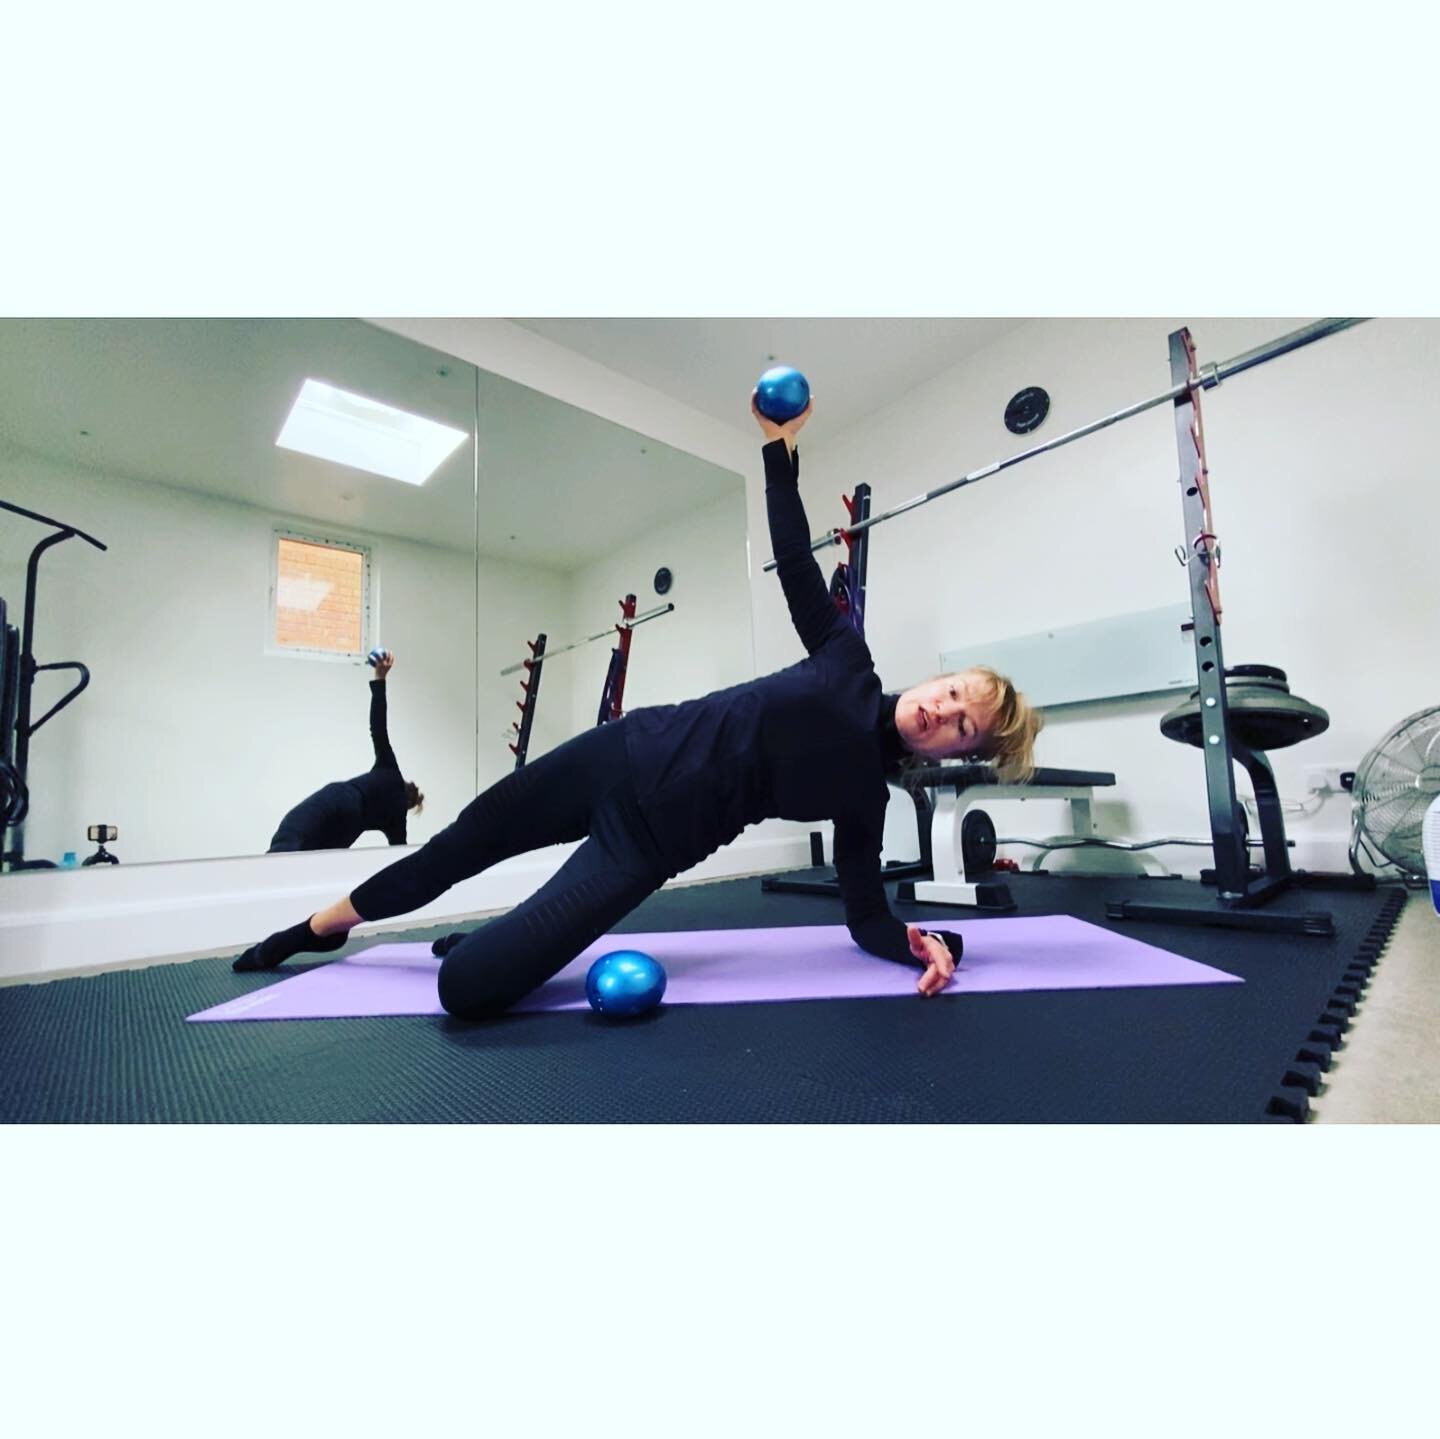 Saturday morning Pilates!
We all dreamed about that one day we become an acrobat! 🤦&zwj;♀️

#pilates #onlinepilates #onlinepilatesclasses #surrey #guildford #cobham #weybridge #woking